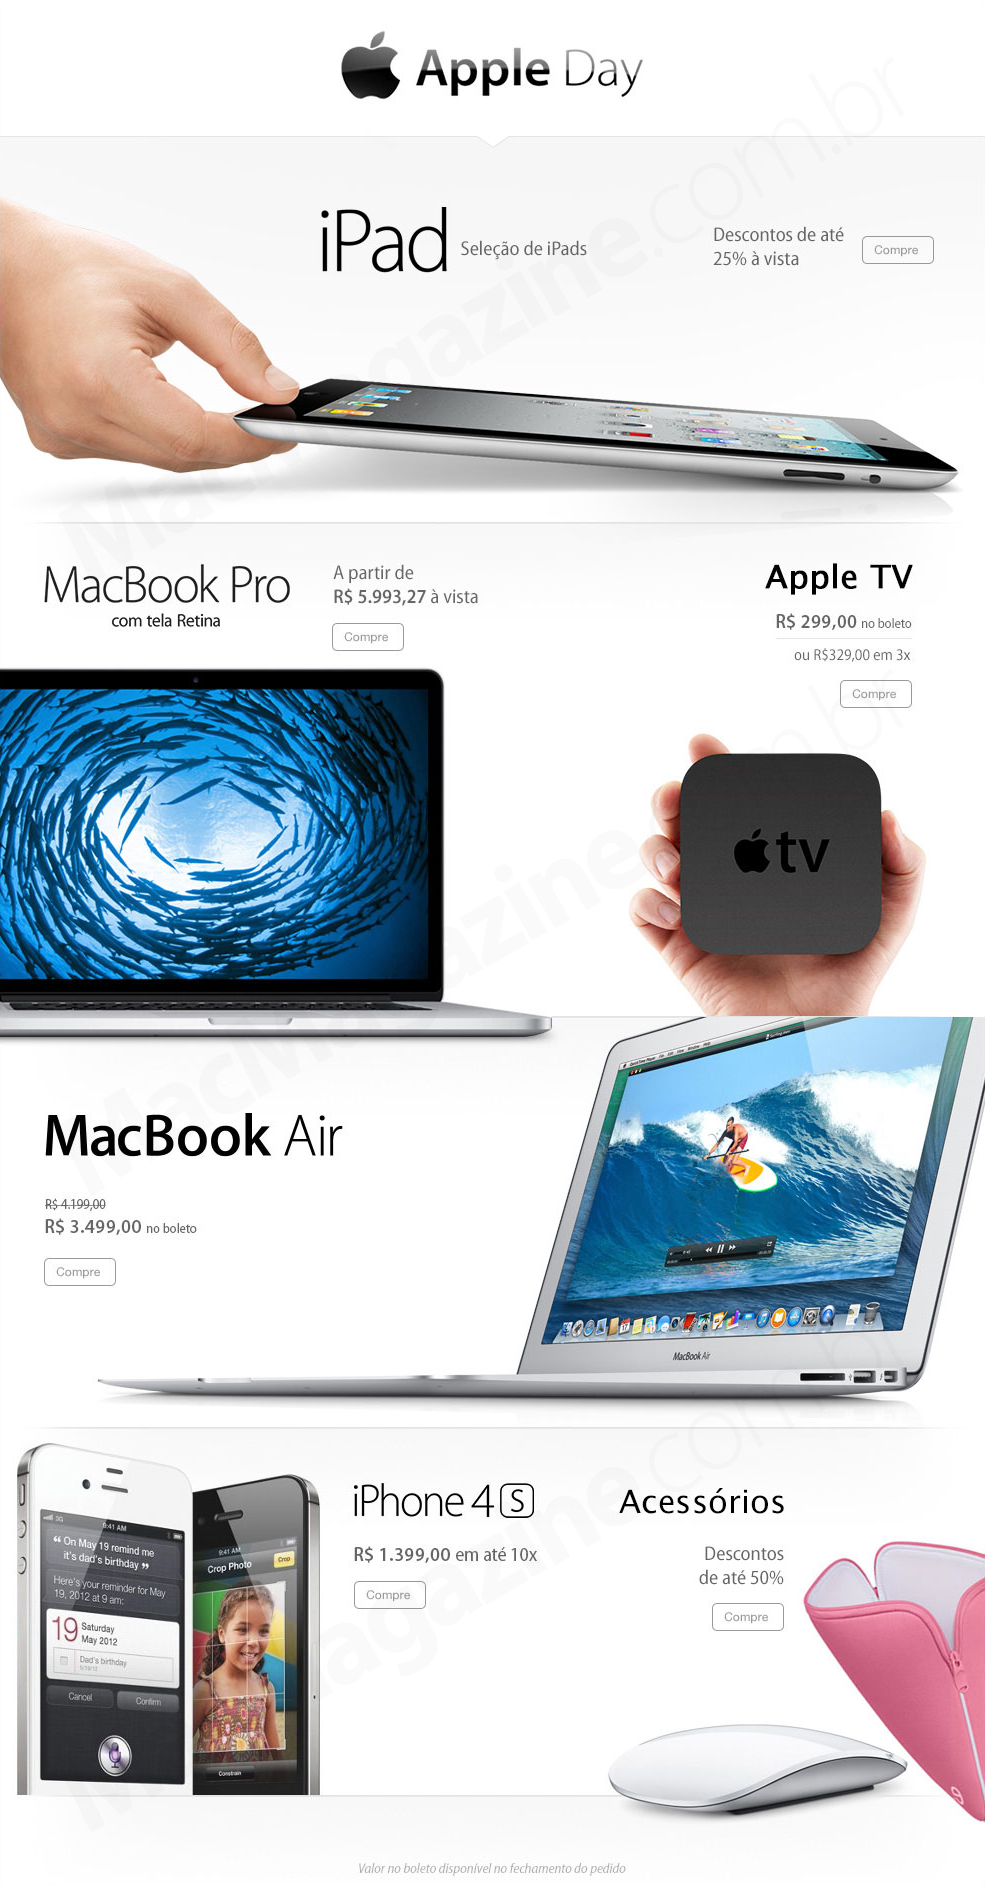 “Apple Day”: Fast Shop offers discounts on iPads, Apple TV, MacBooks Air and Pro with Retina display